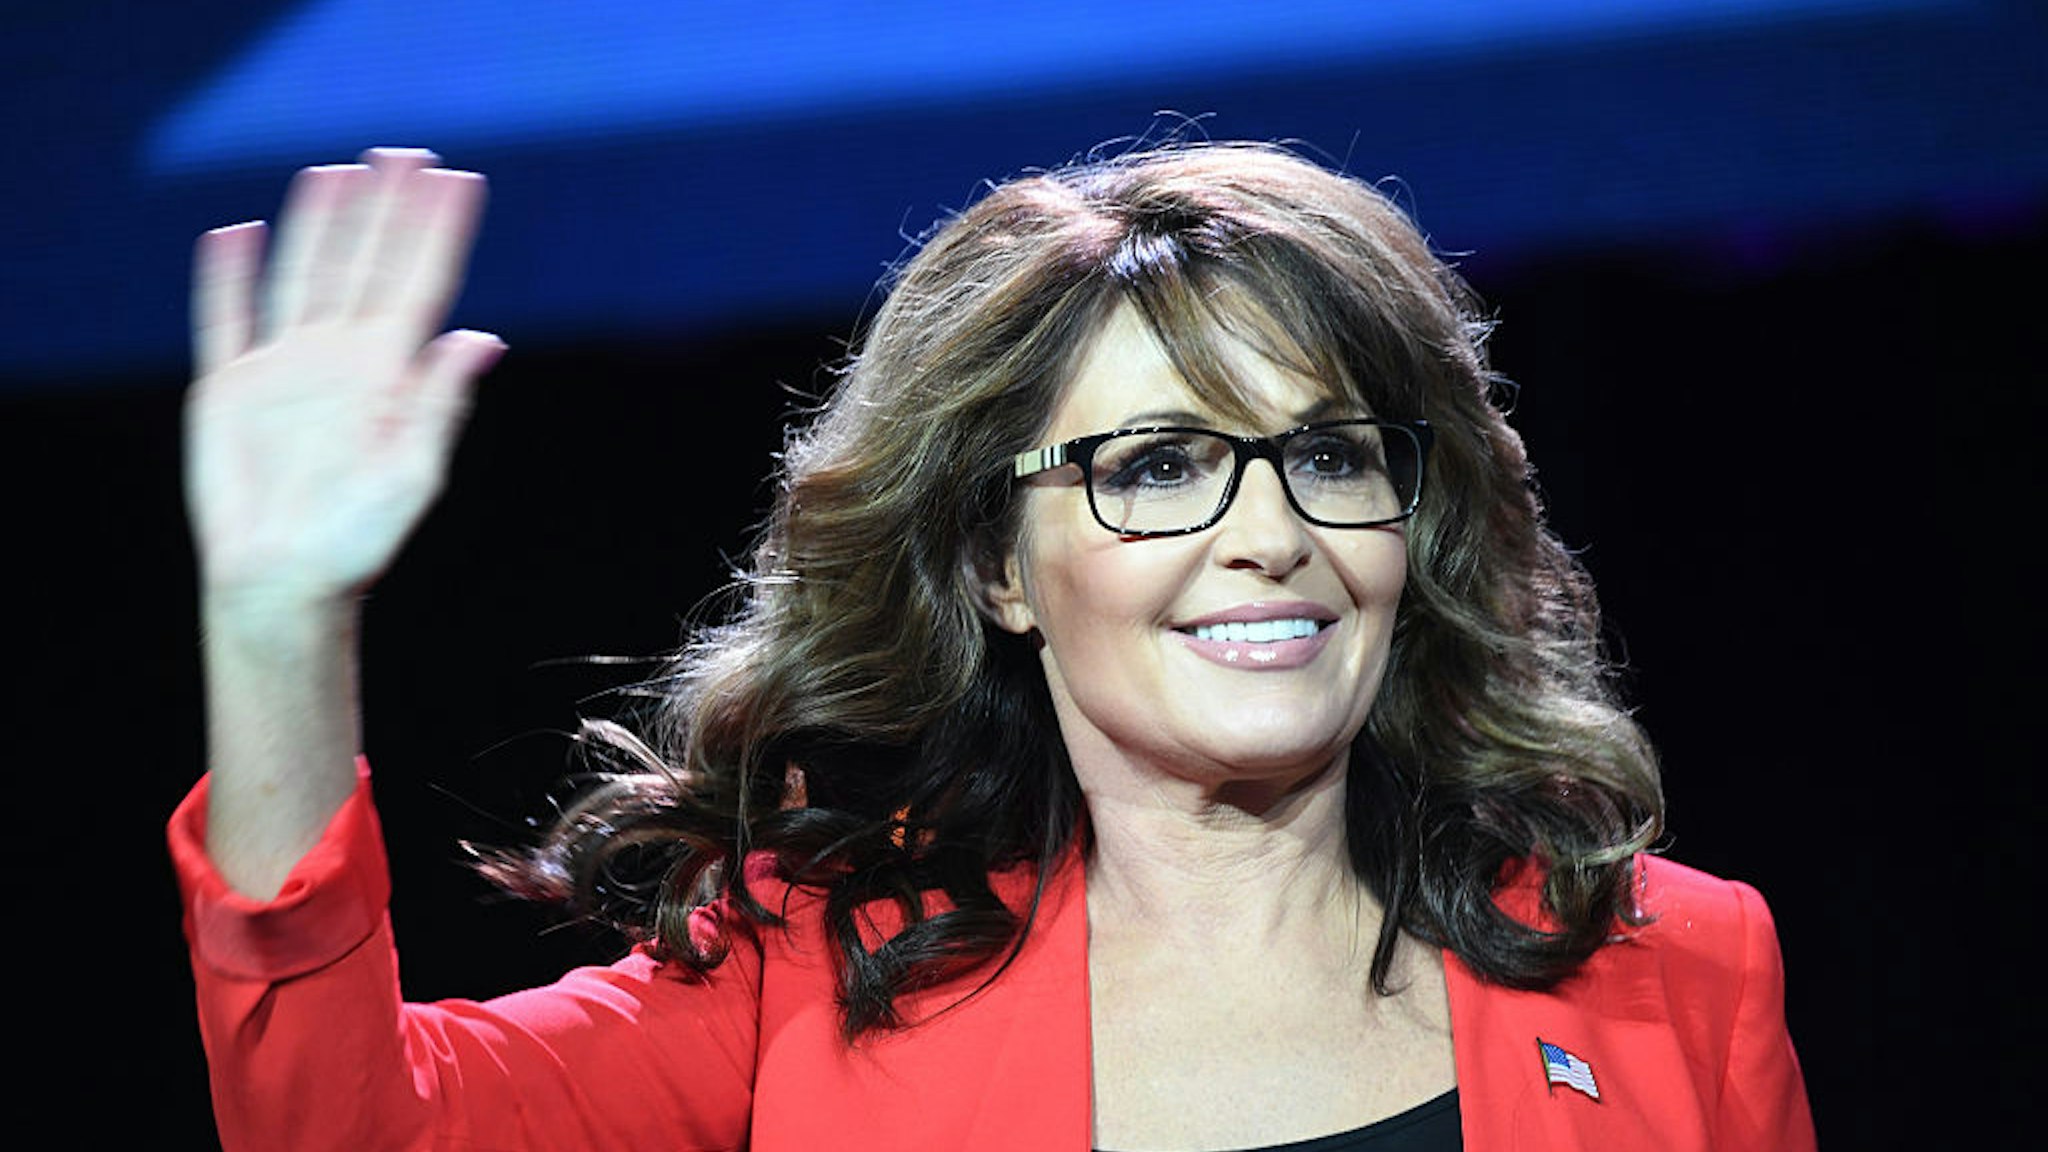 DENVER, CO - JULY 01 Former GOP vice presidential candidate Sarah Palin speaks during the 2016 Western Conservative the Colorado Convention Center in Denver, July 01, 2016. It is the 7th annual Western Conservative Summit. (Photo by RJ Sangosti/The Denver Post via Getty Images)